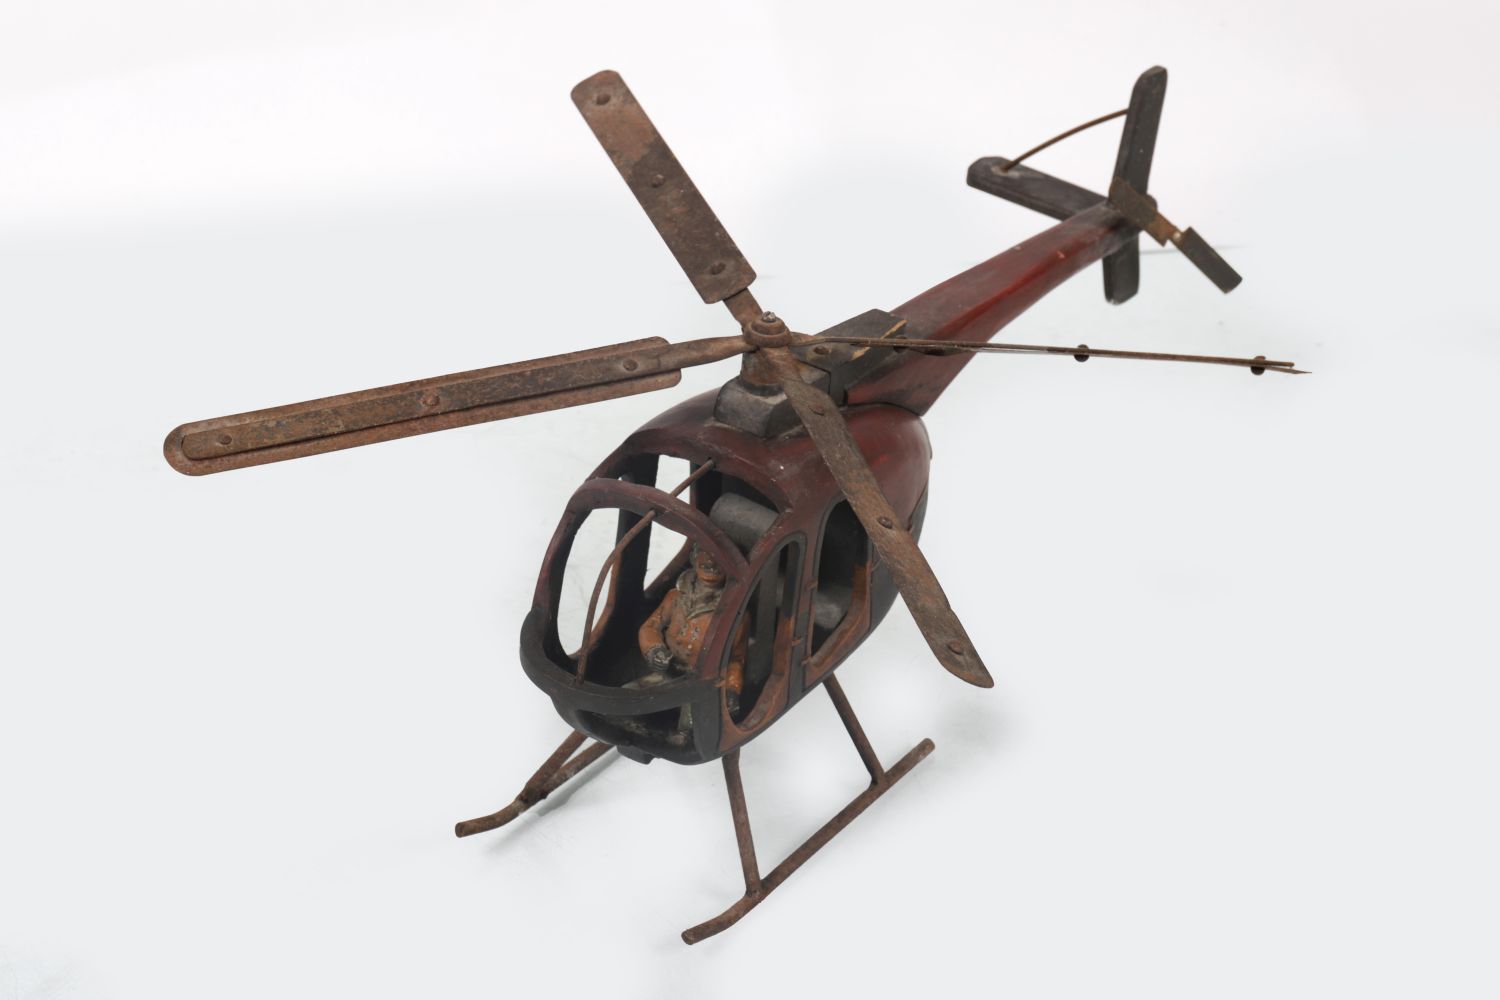 SCALE WOODEN MODEL OF A HELICOPTER